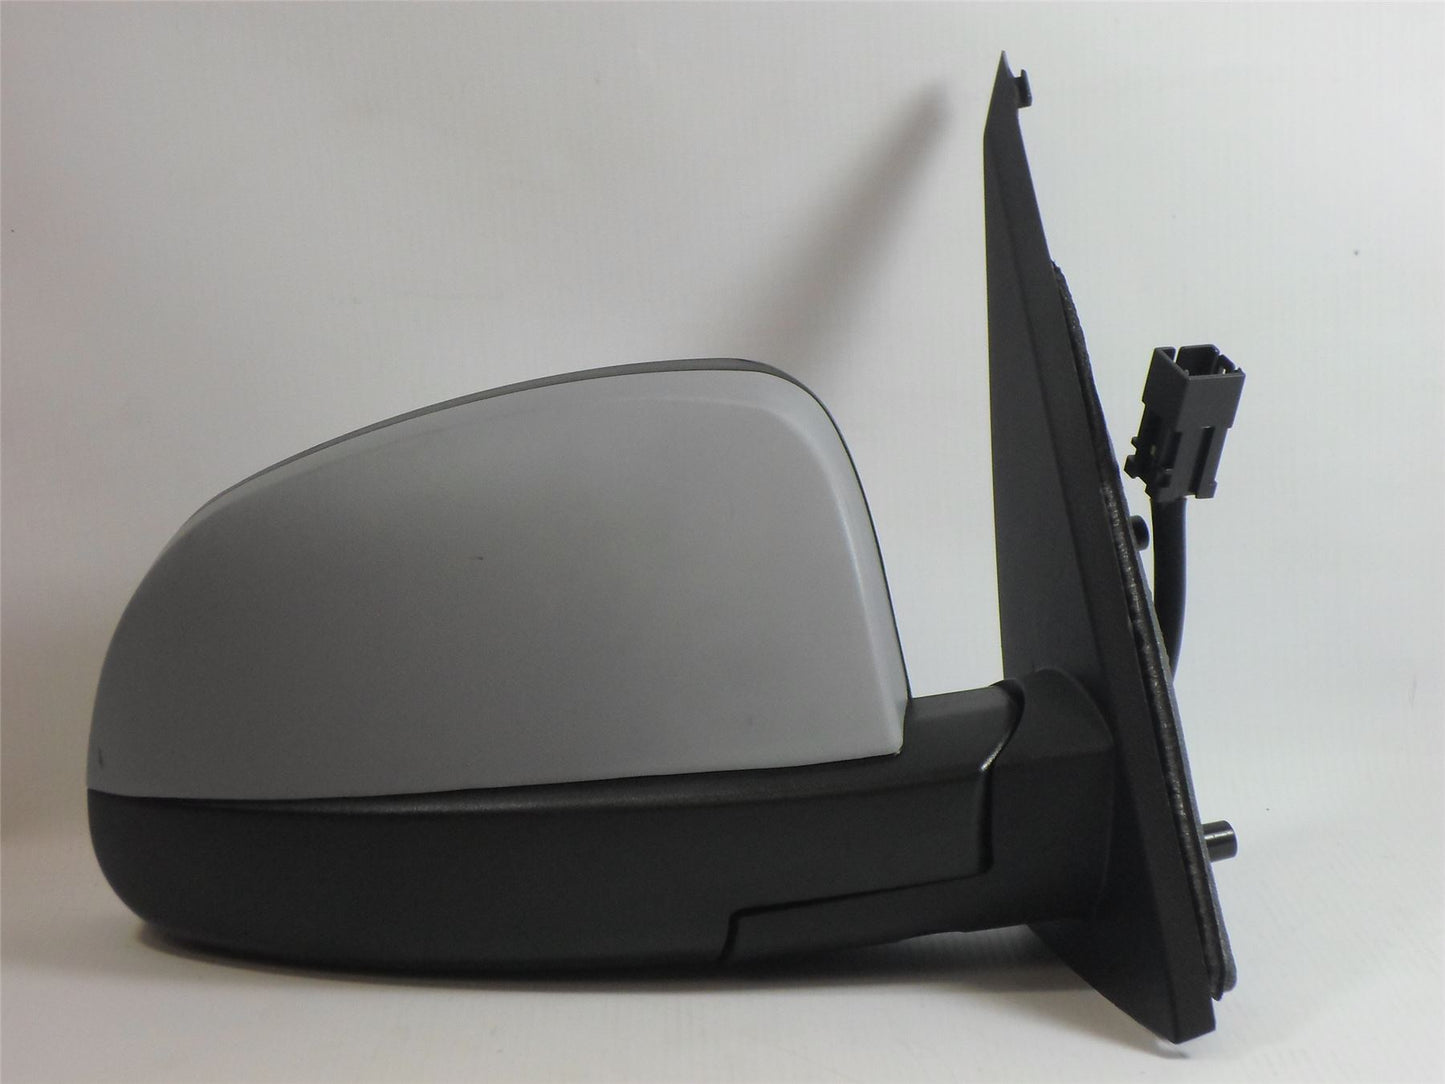 Vauxhall Meriva 2003-9/2010 Electric Wing Door Mirror Primed Cover Drivers Side